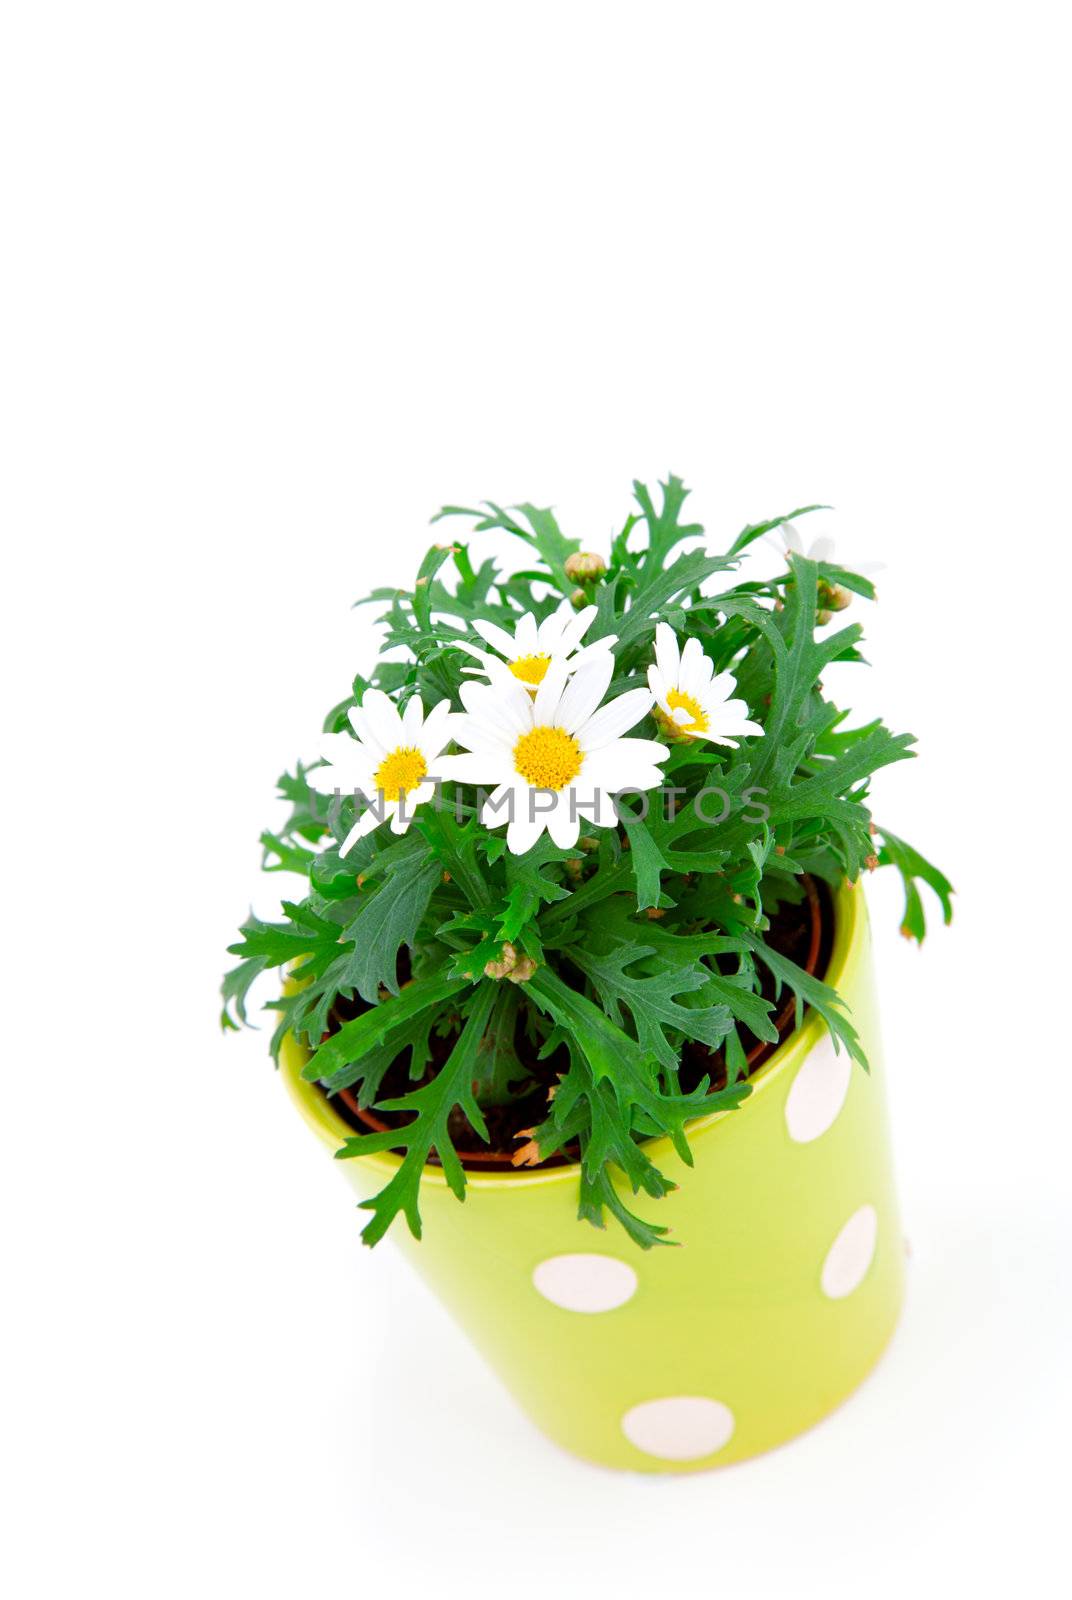 marguerite over a white background.